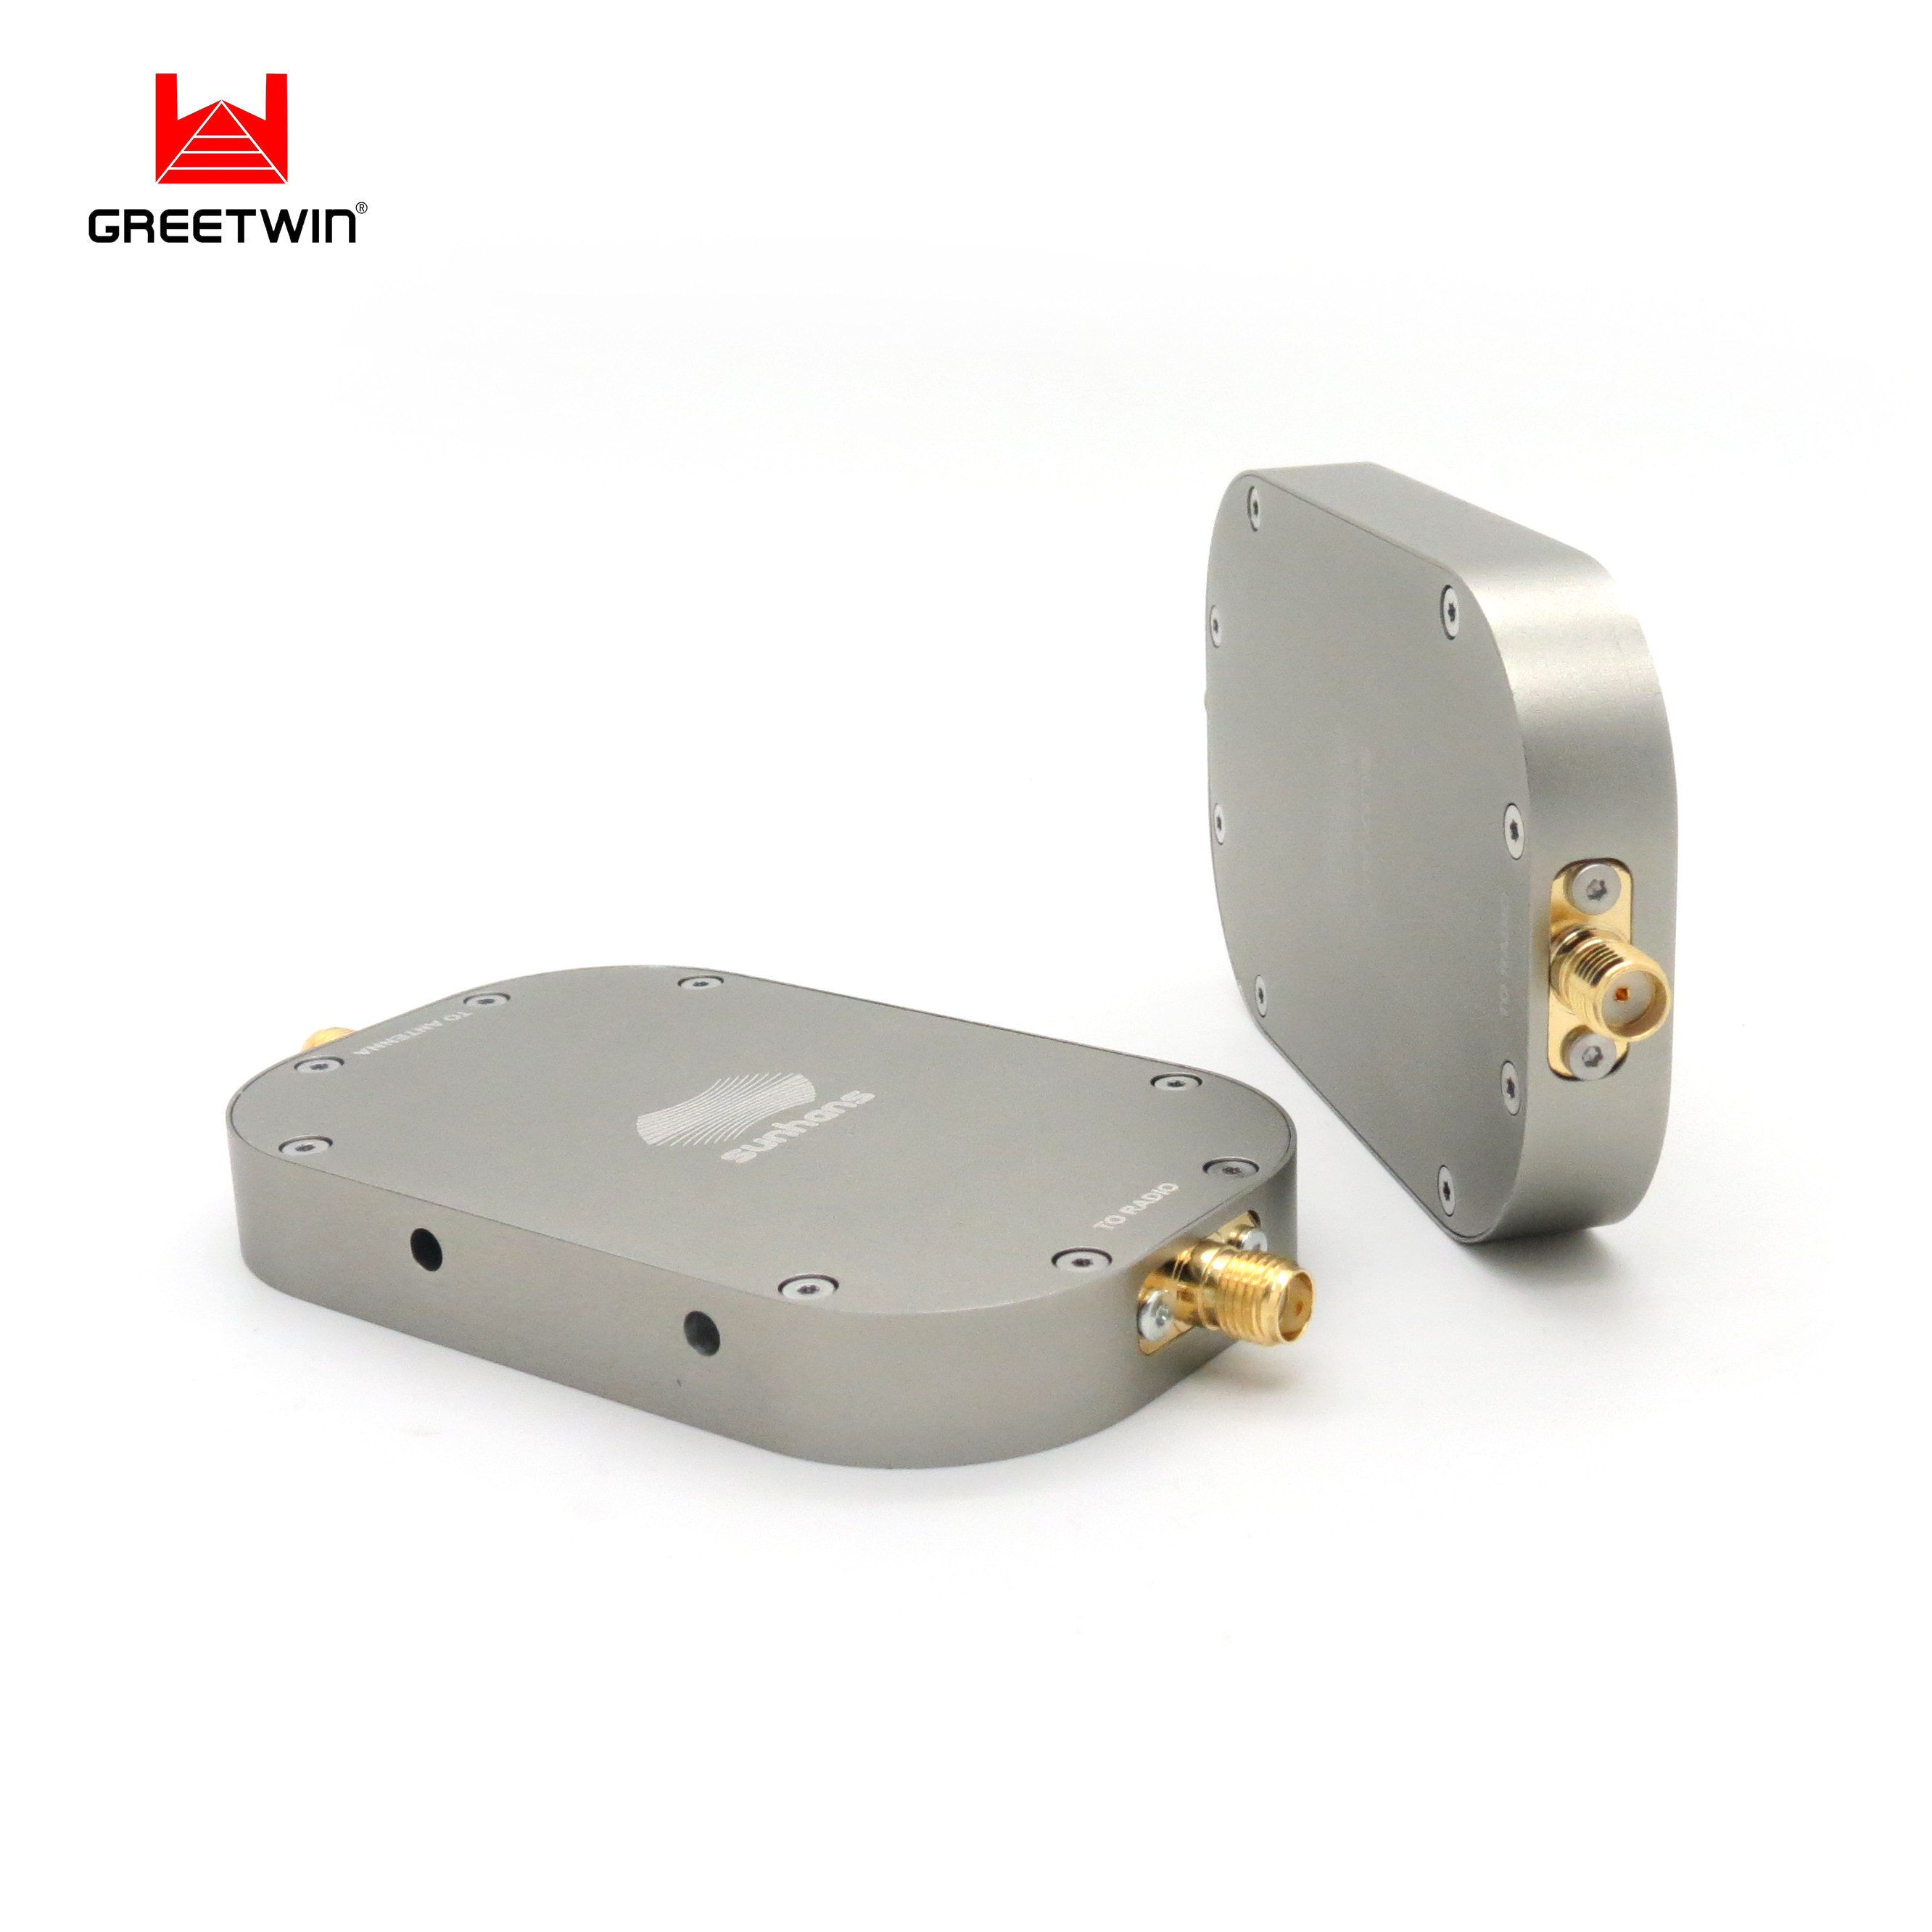 2w 2.4g 5.8g Airplane Wifi Repeater Booster para Uav Drones